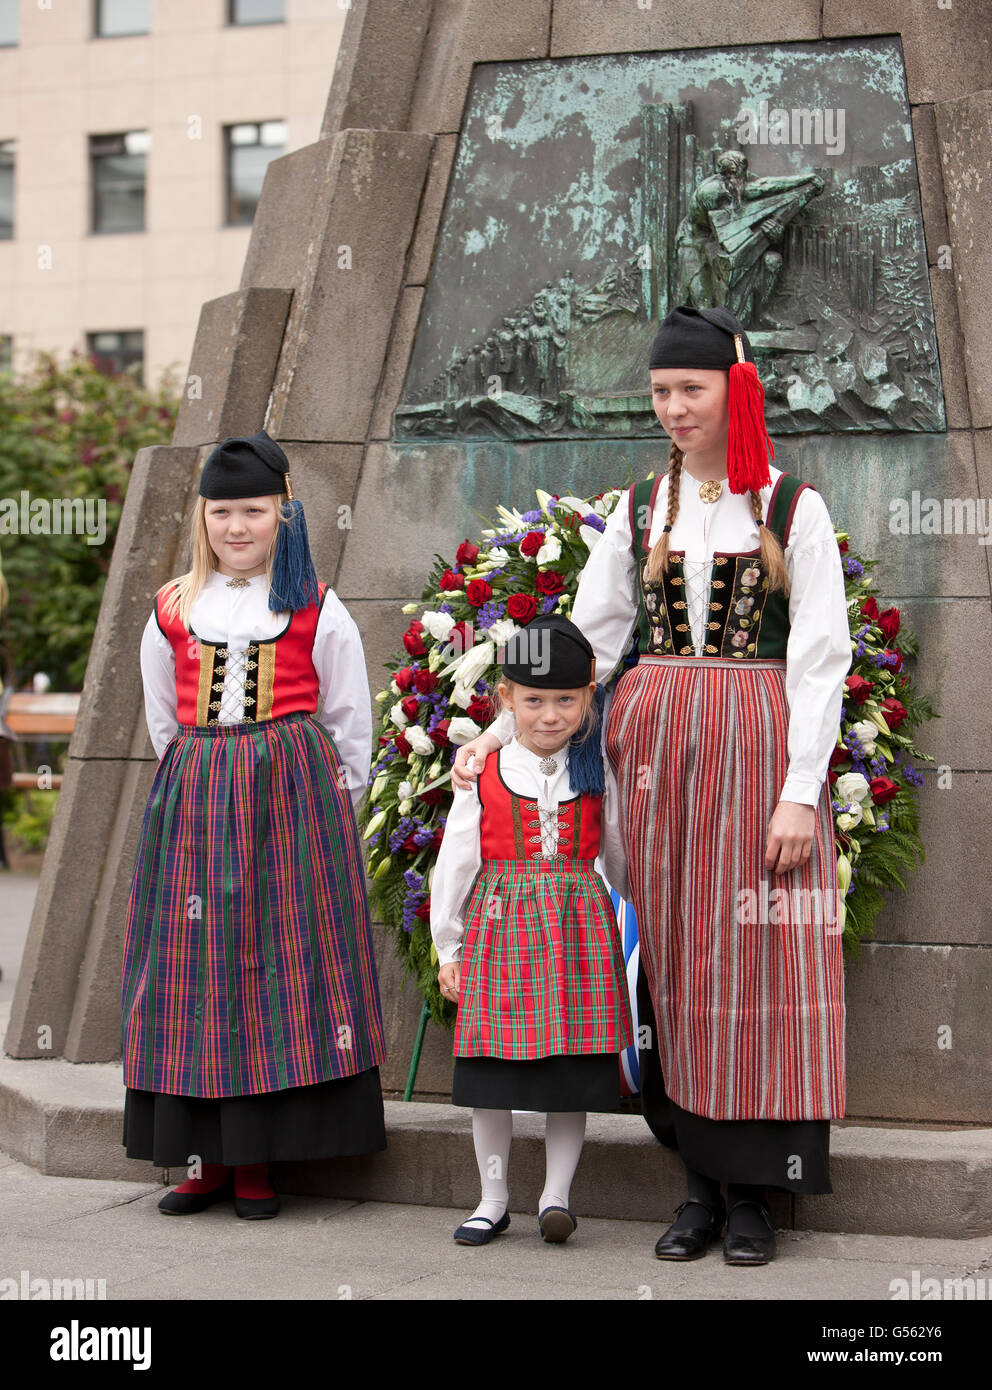 Girls dressed in the Icelandic National Costume on Iceland's Independence Day, June 17, Reykjavik, Iceland Stock Photo